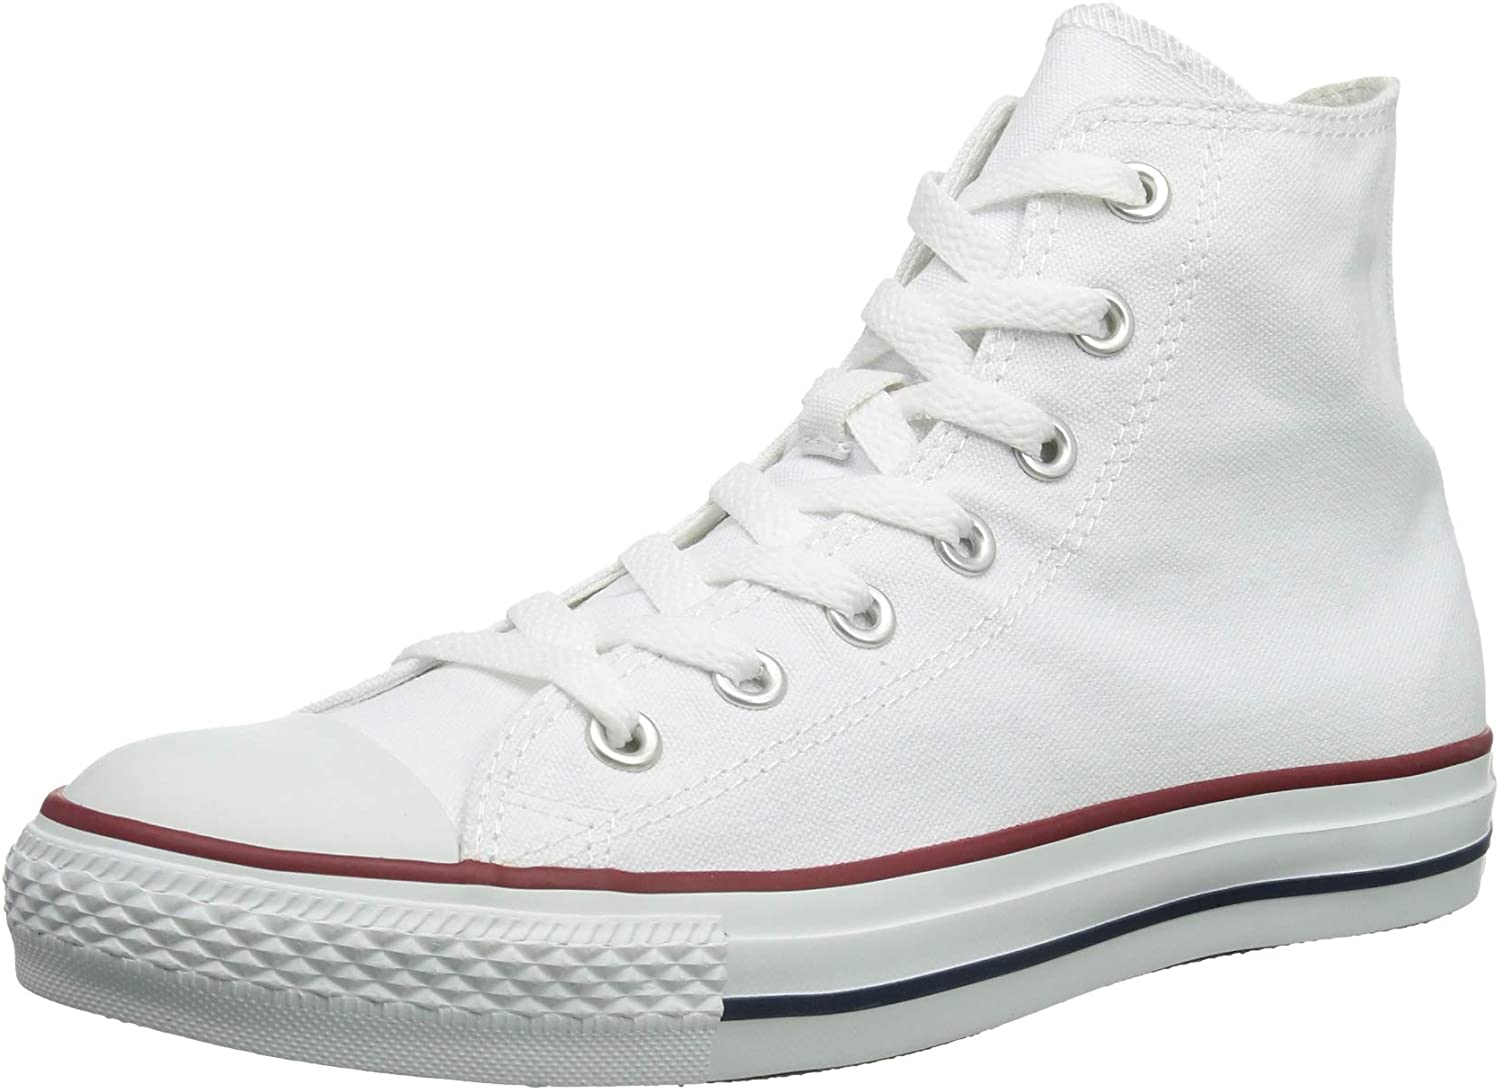 Add a retro staple to your style with the iconic silhouette of the Converse Chuck Taylor All Star '70 Hi sneakers